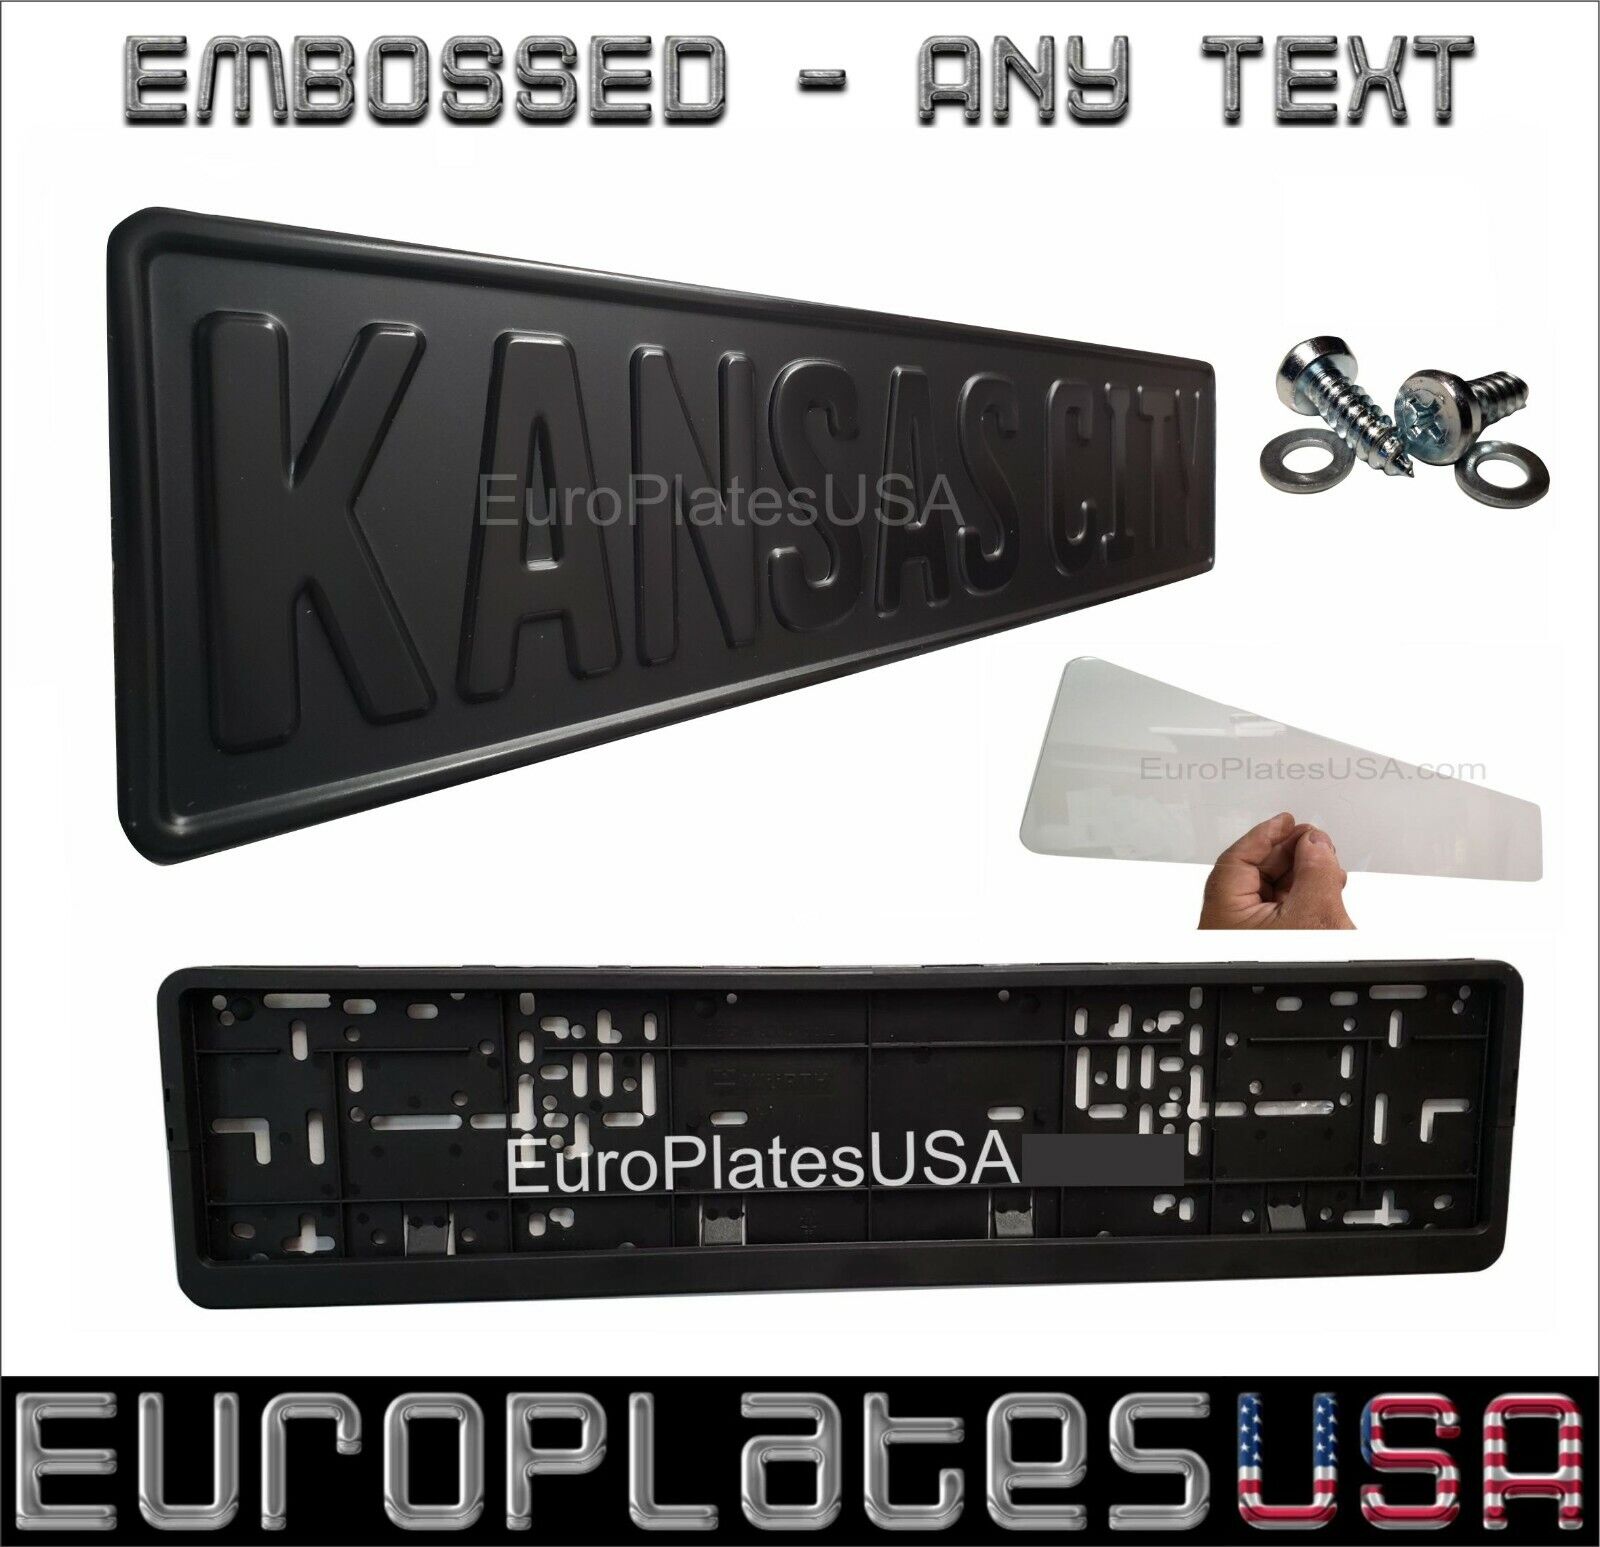 European License Plate Kit, ANY TEXT, EMBOSSED, ALL FLAT BLACK MATTE, BLACK TEXT